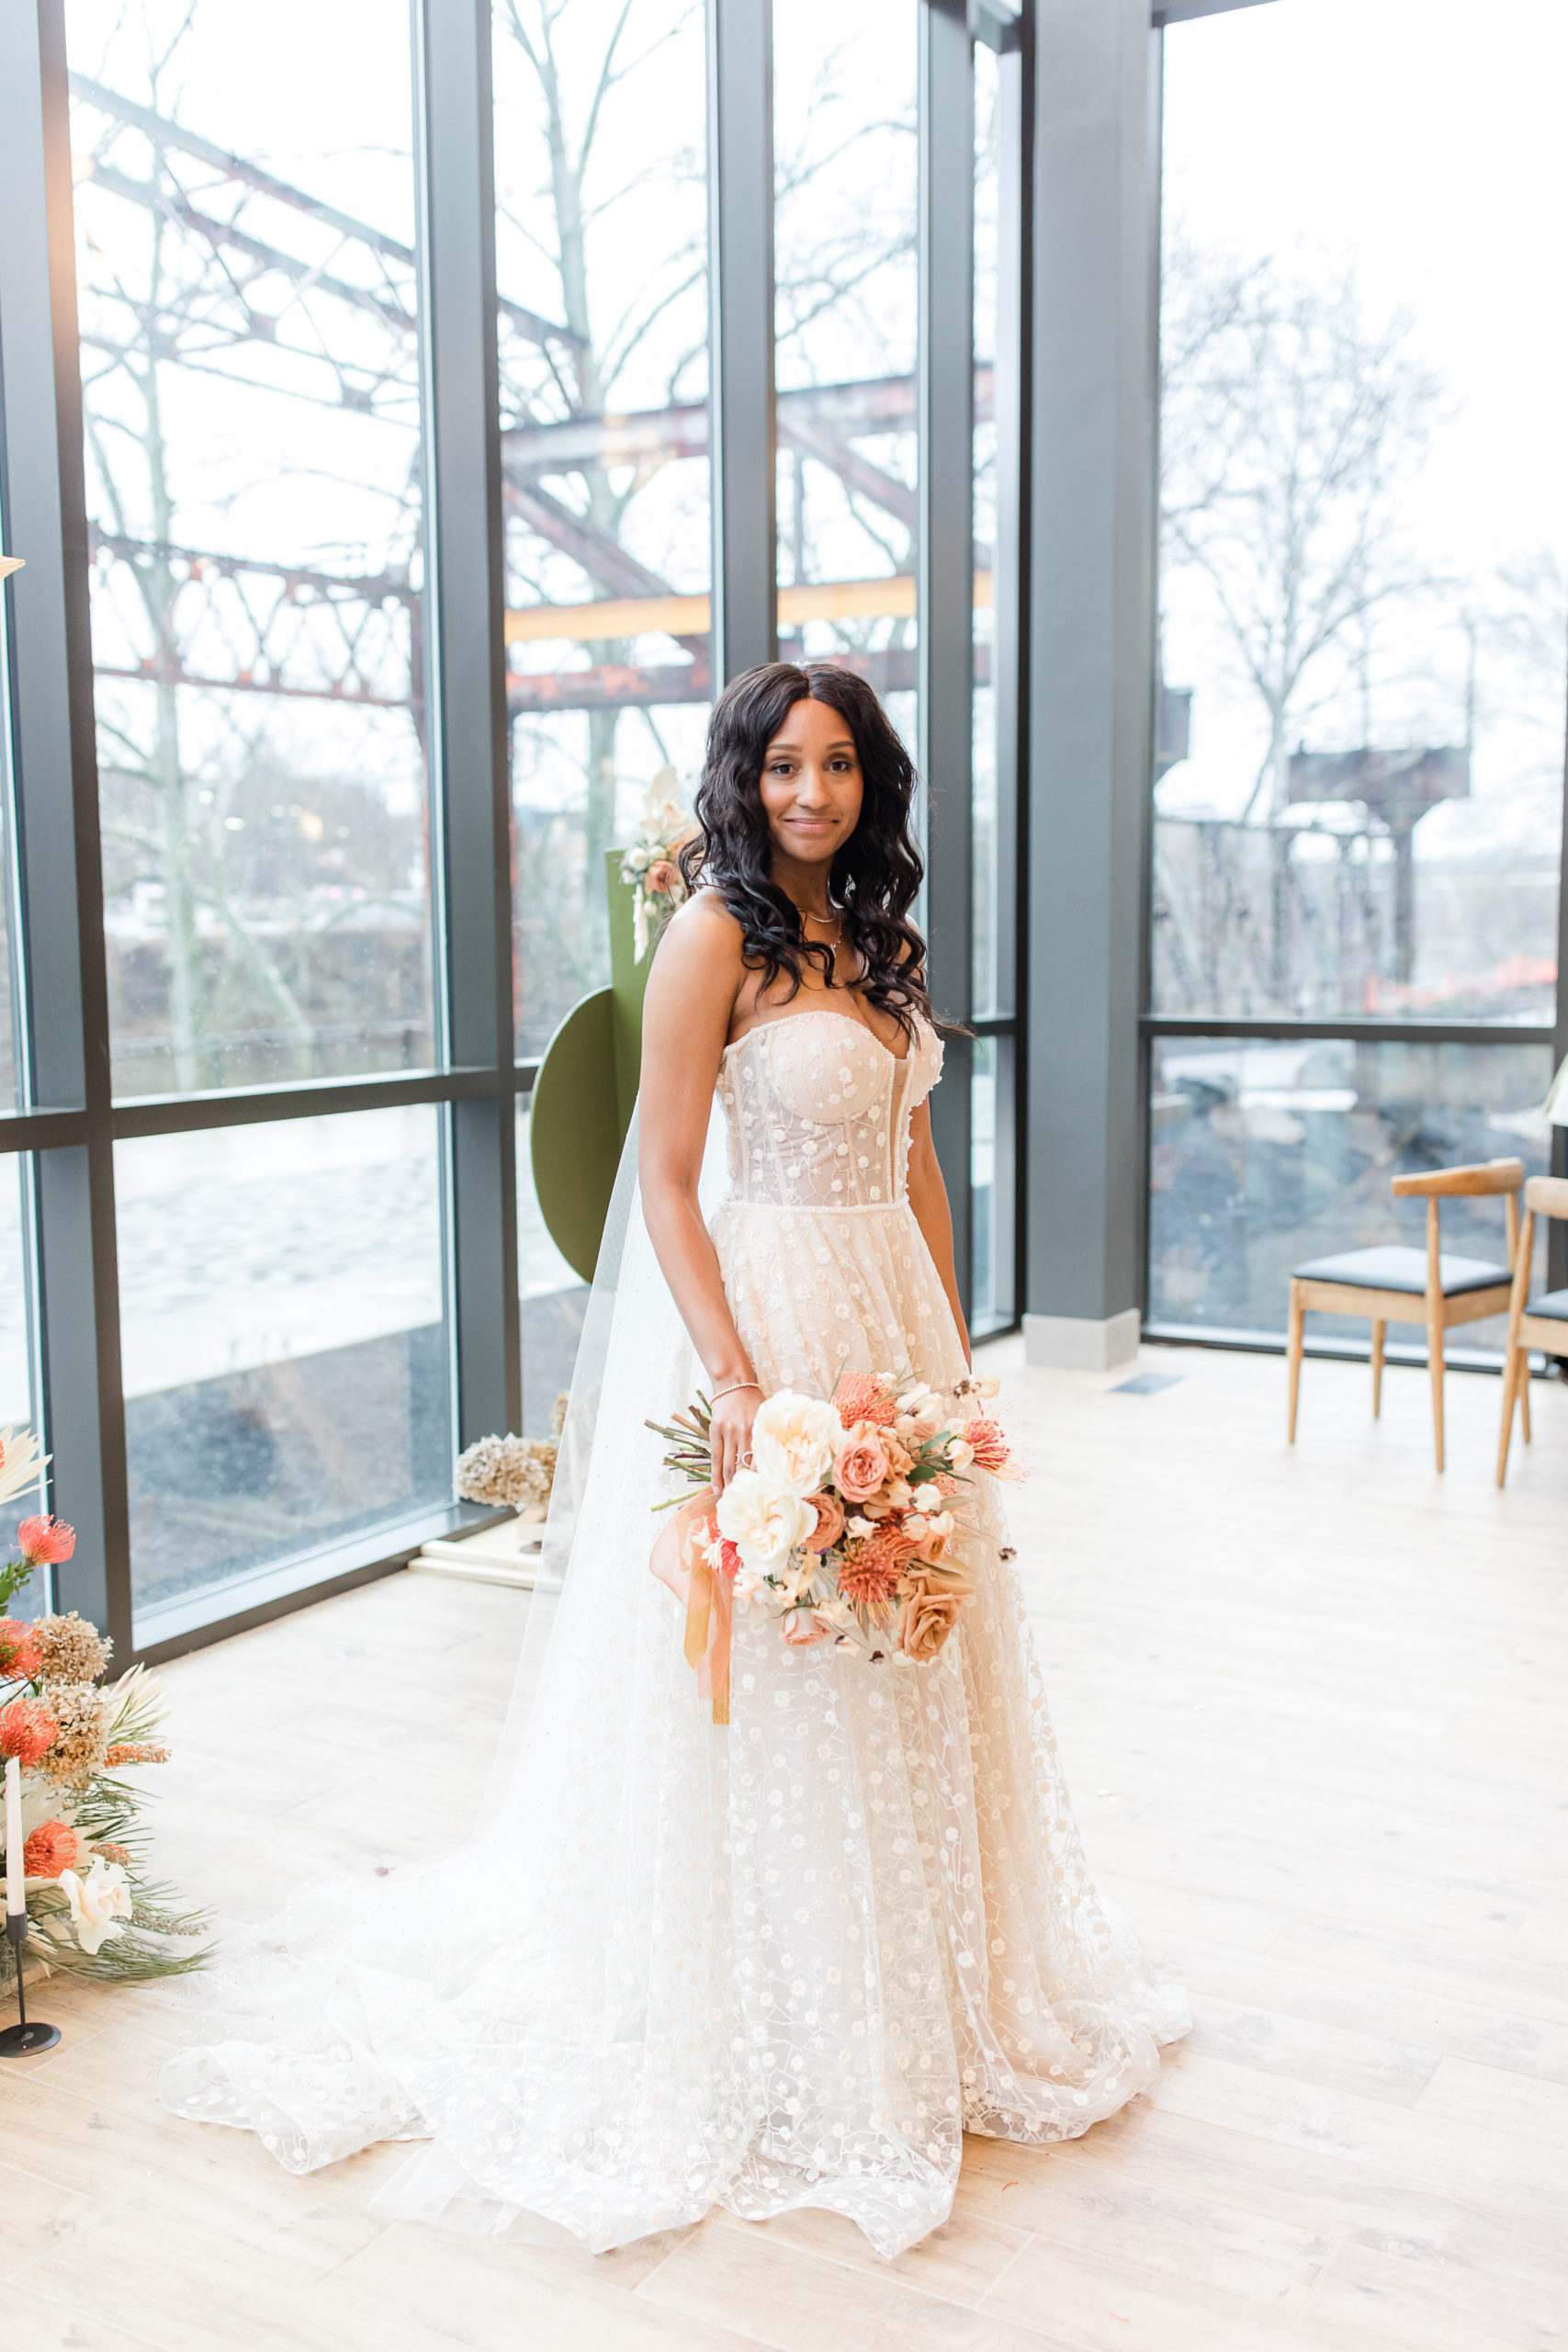 bride in wedding dress with polka dot lace overlay holds bouquet of flowers in Ironworks at Pencoyd Landing